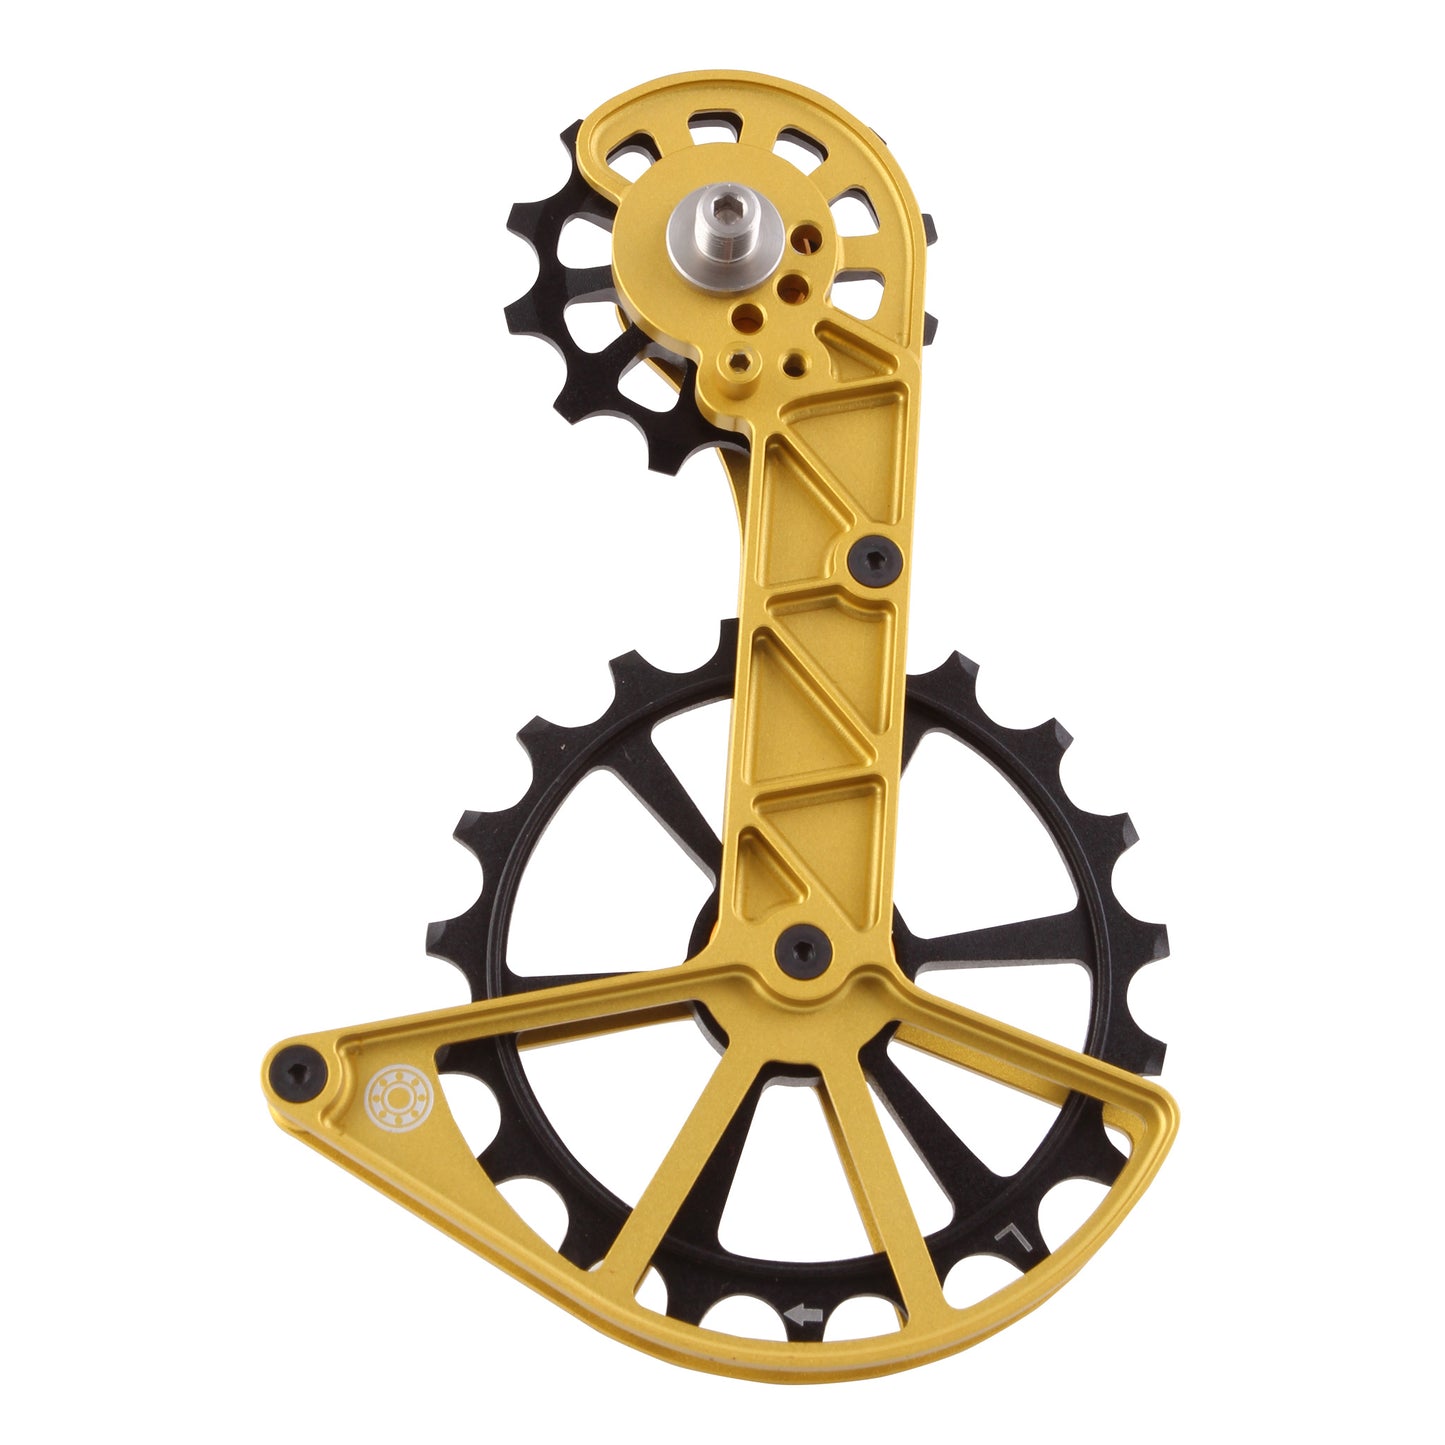 Kolossos Oversized Pulley Cage, Shim RX800 - Gold